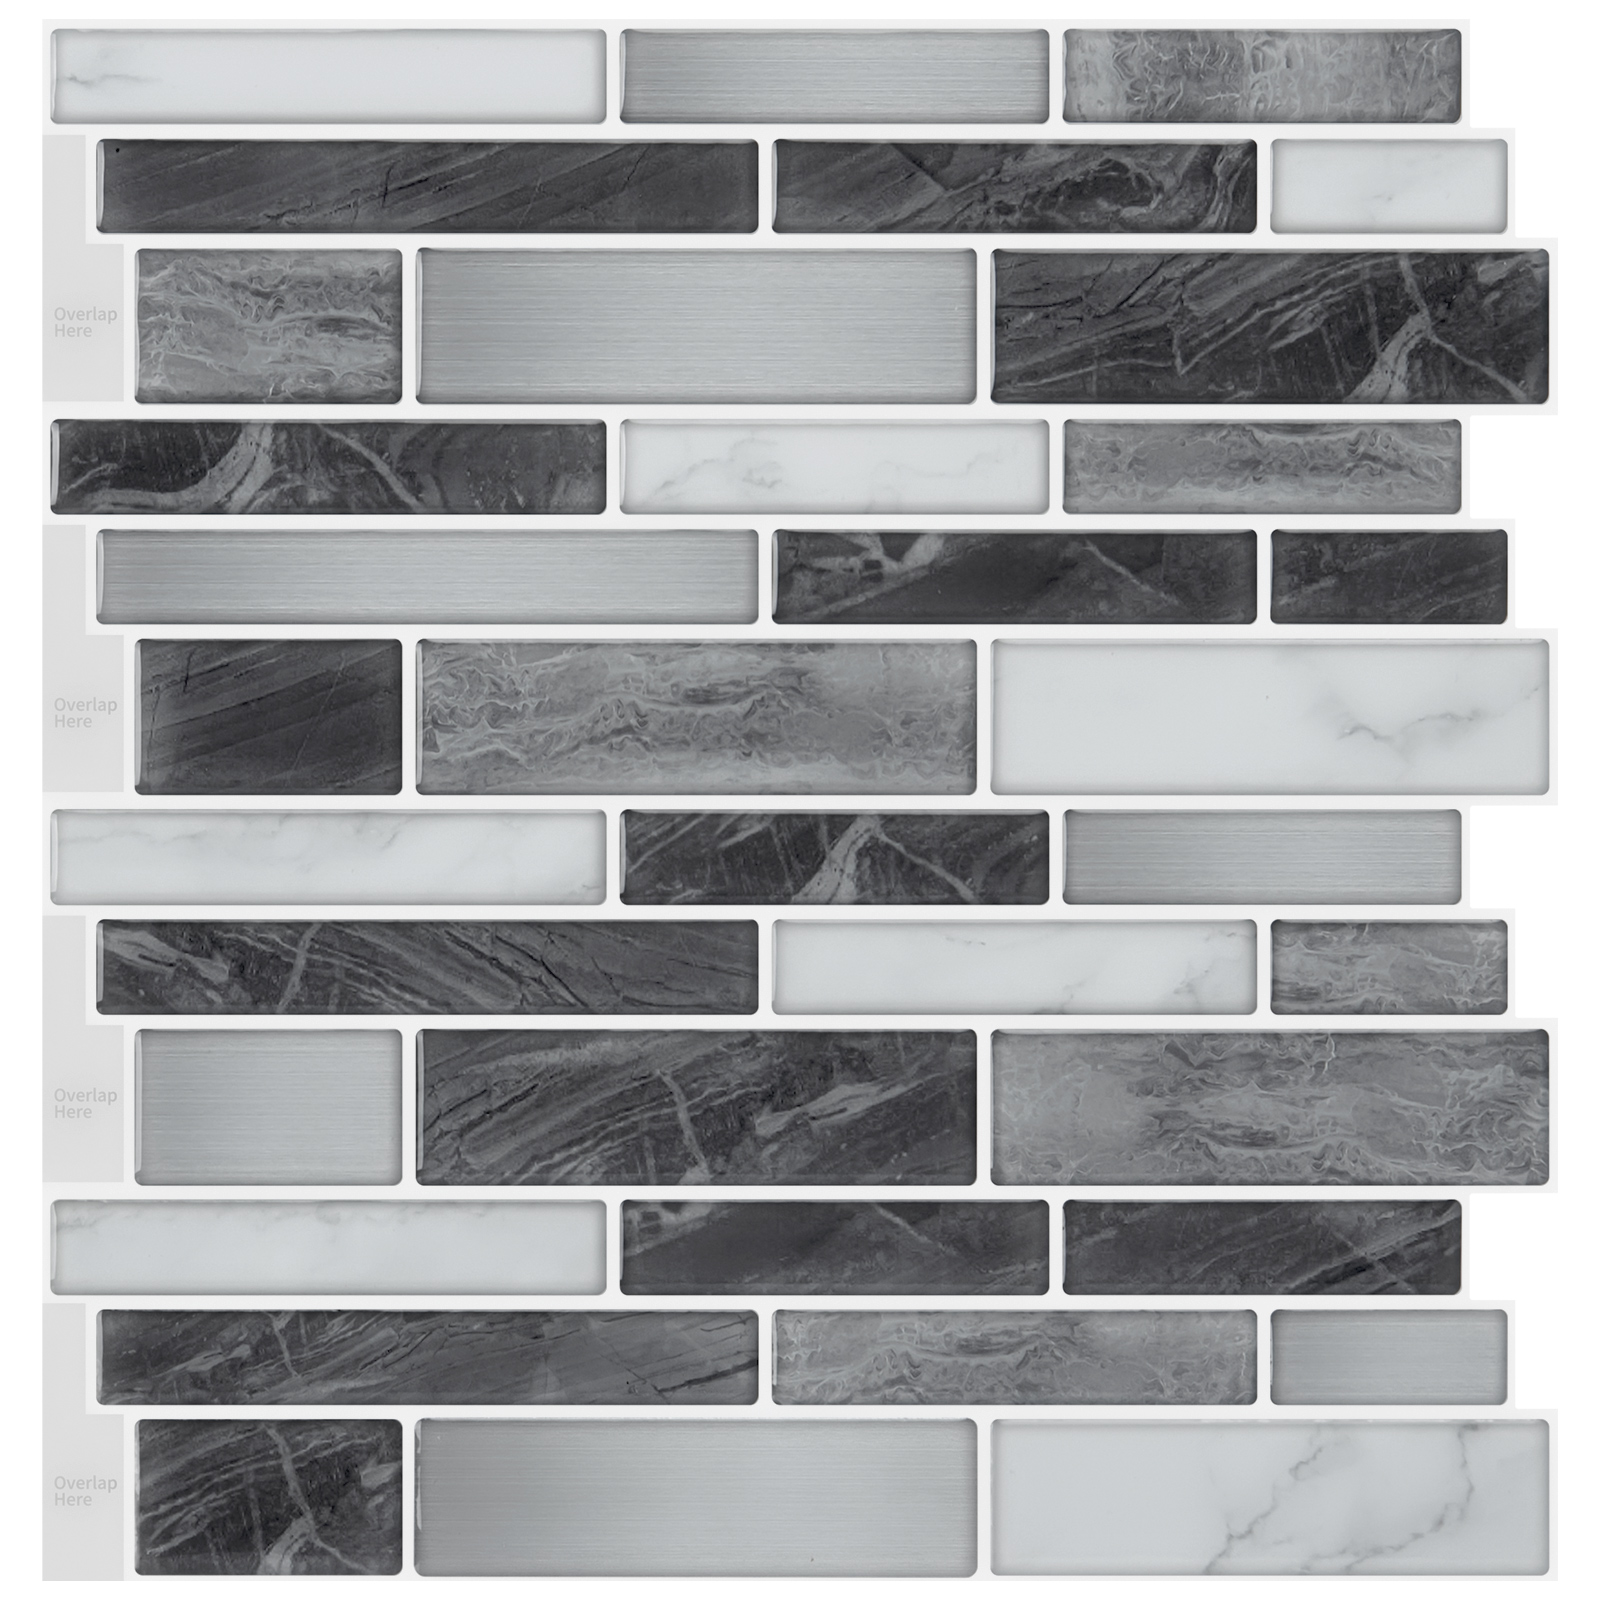 Art3d Marble Look Peel and Stick Subway Tile (Thicker Design) - White